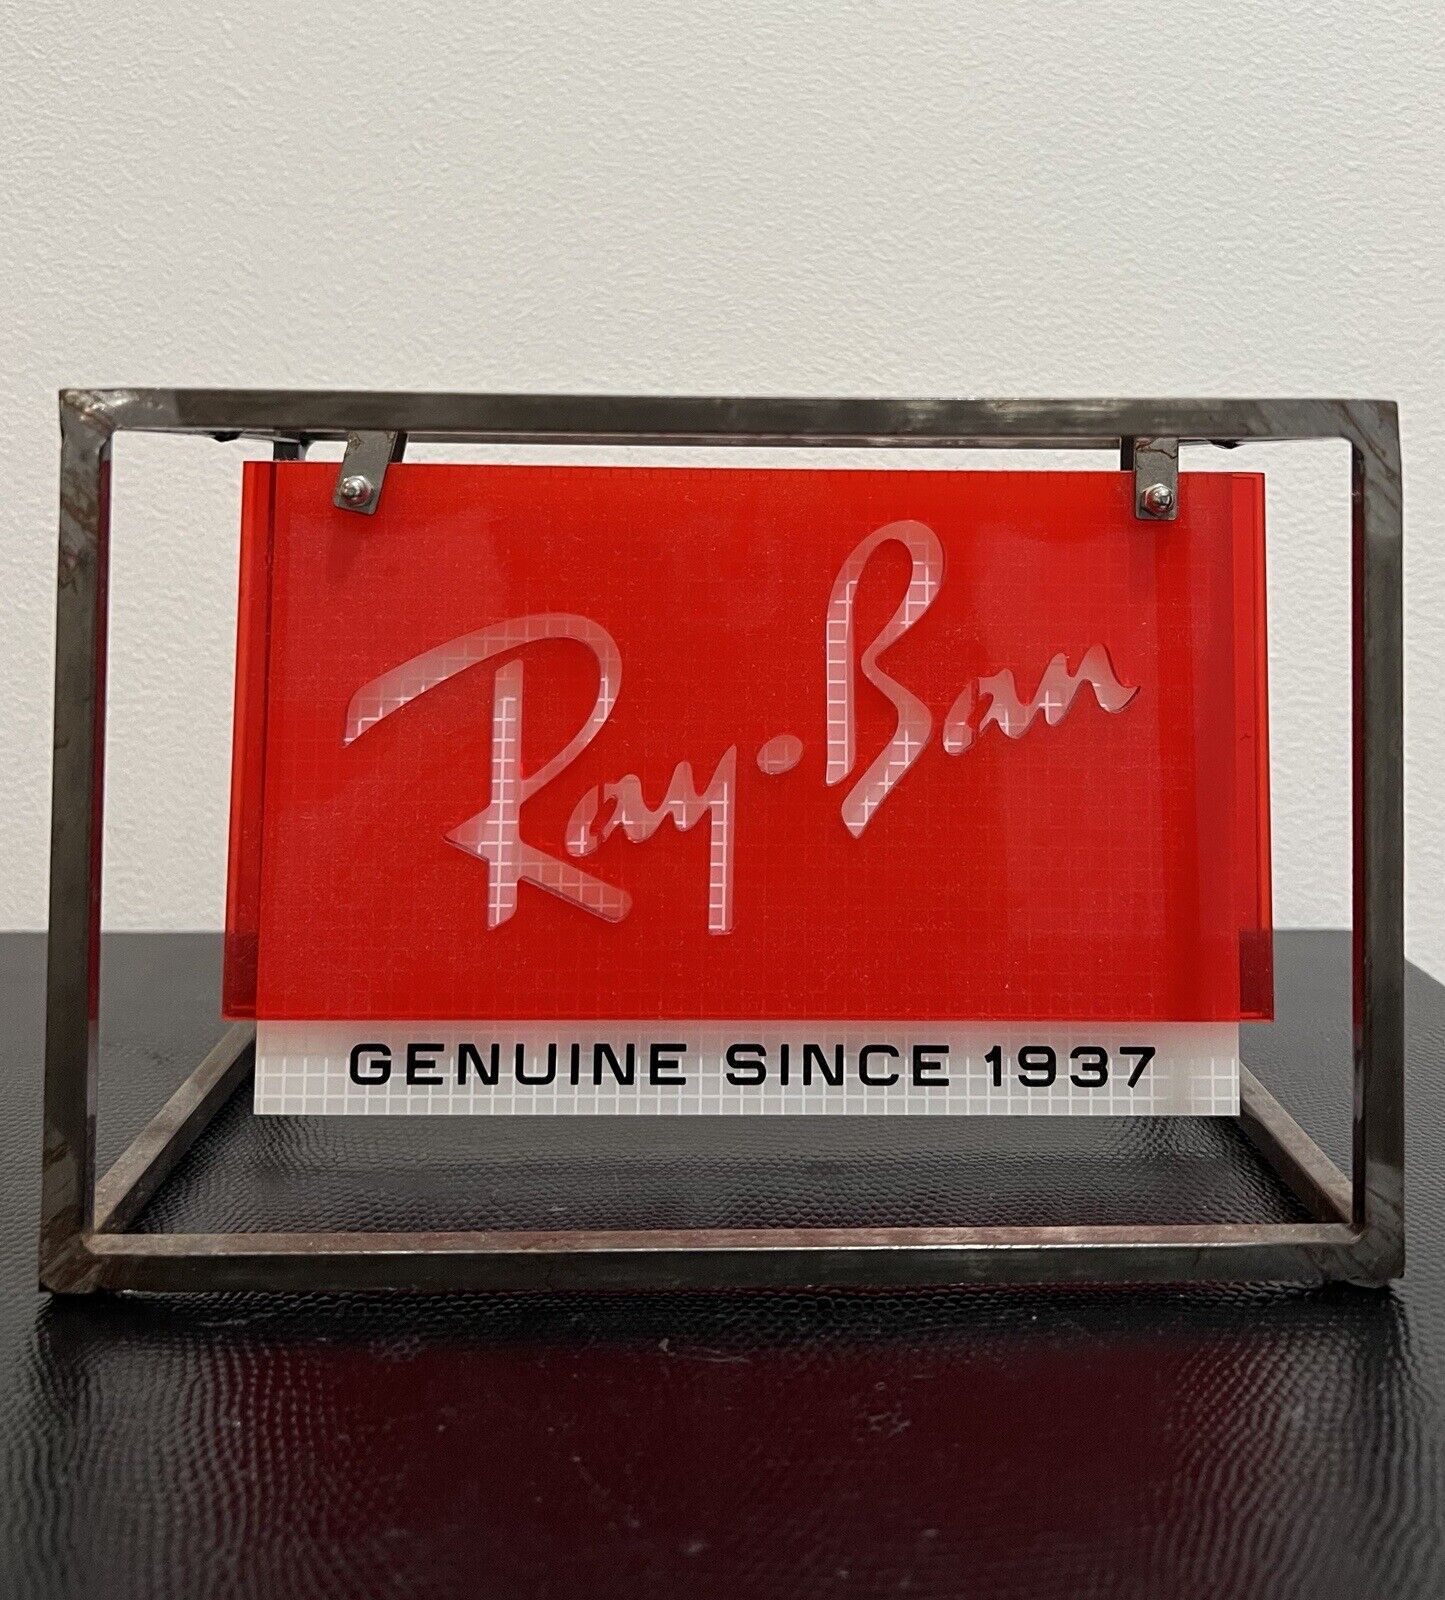 RAY-BAN genuine since 1937 Double Sided Metal/Plexi Counter Display-Authentic